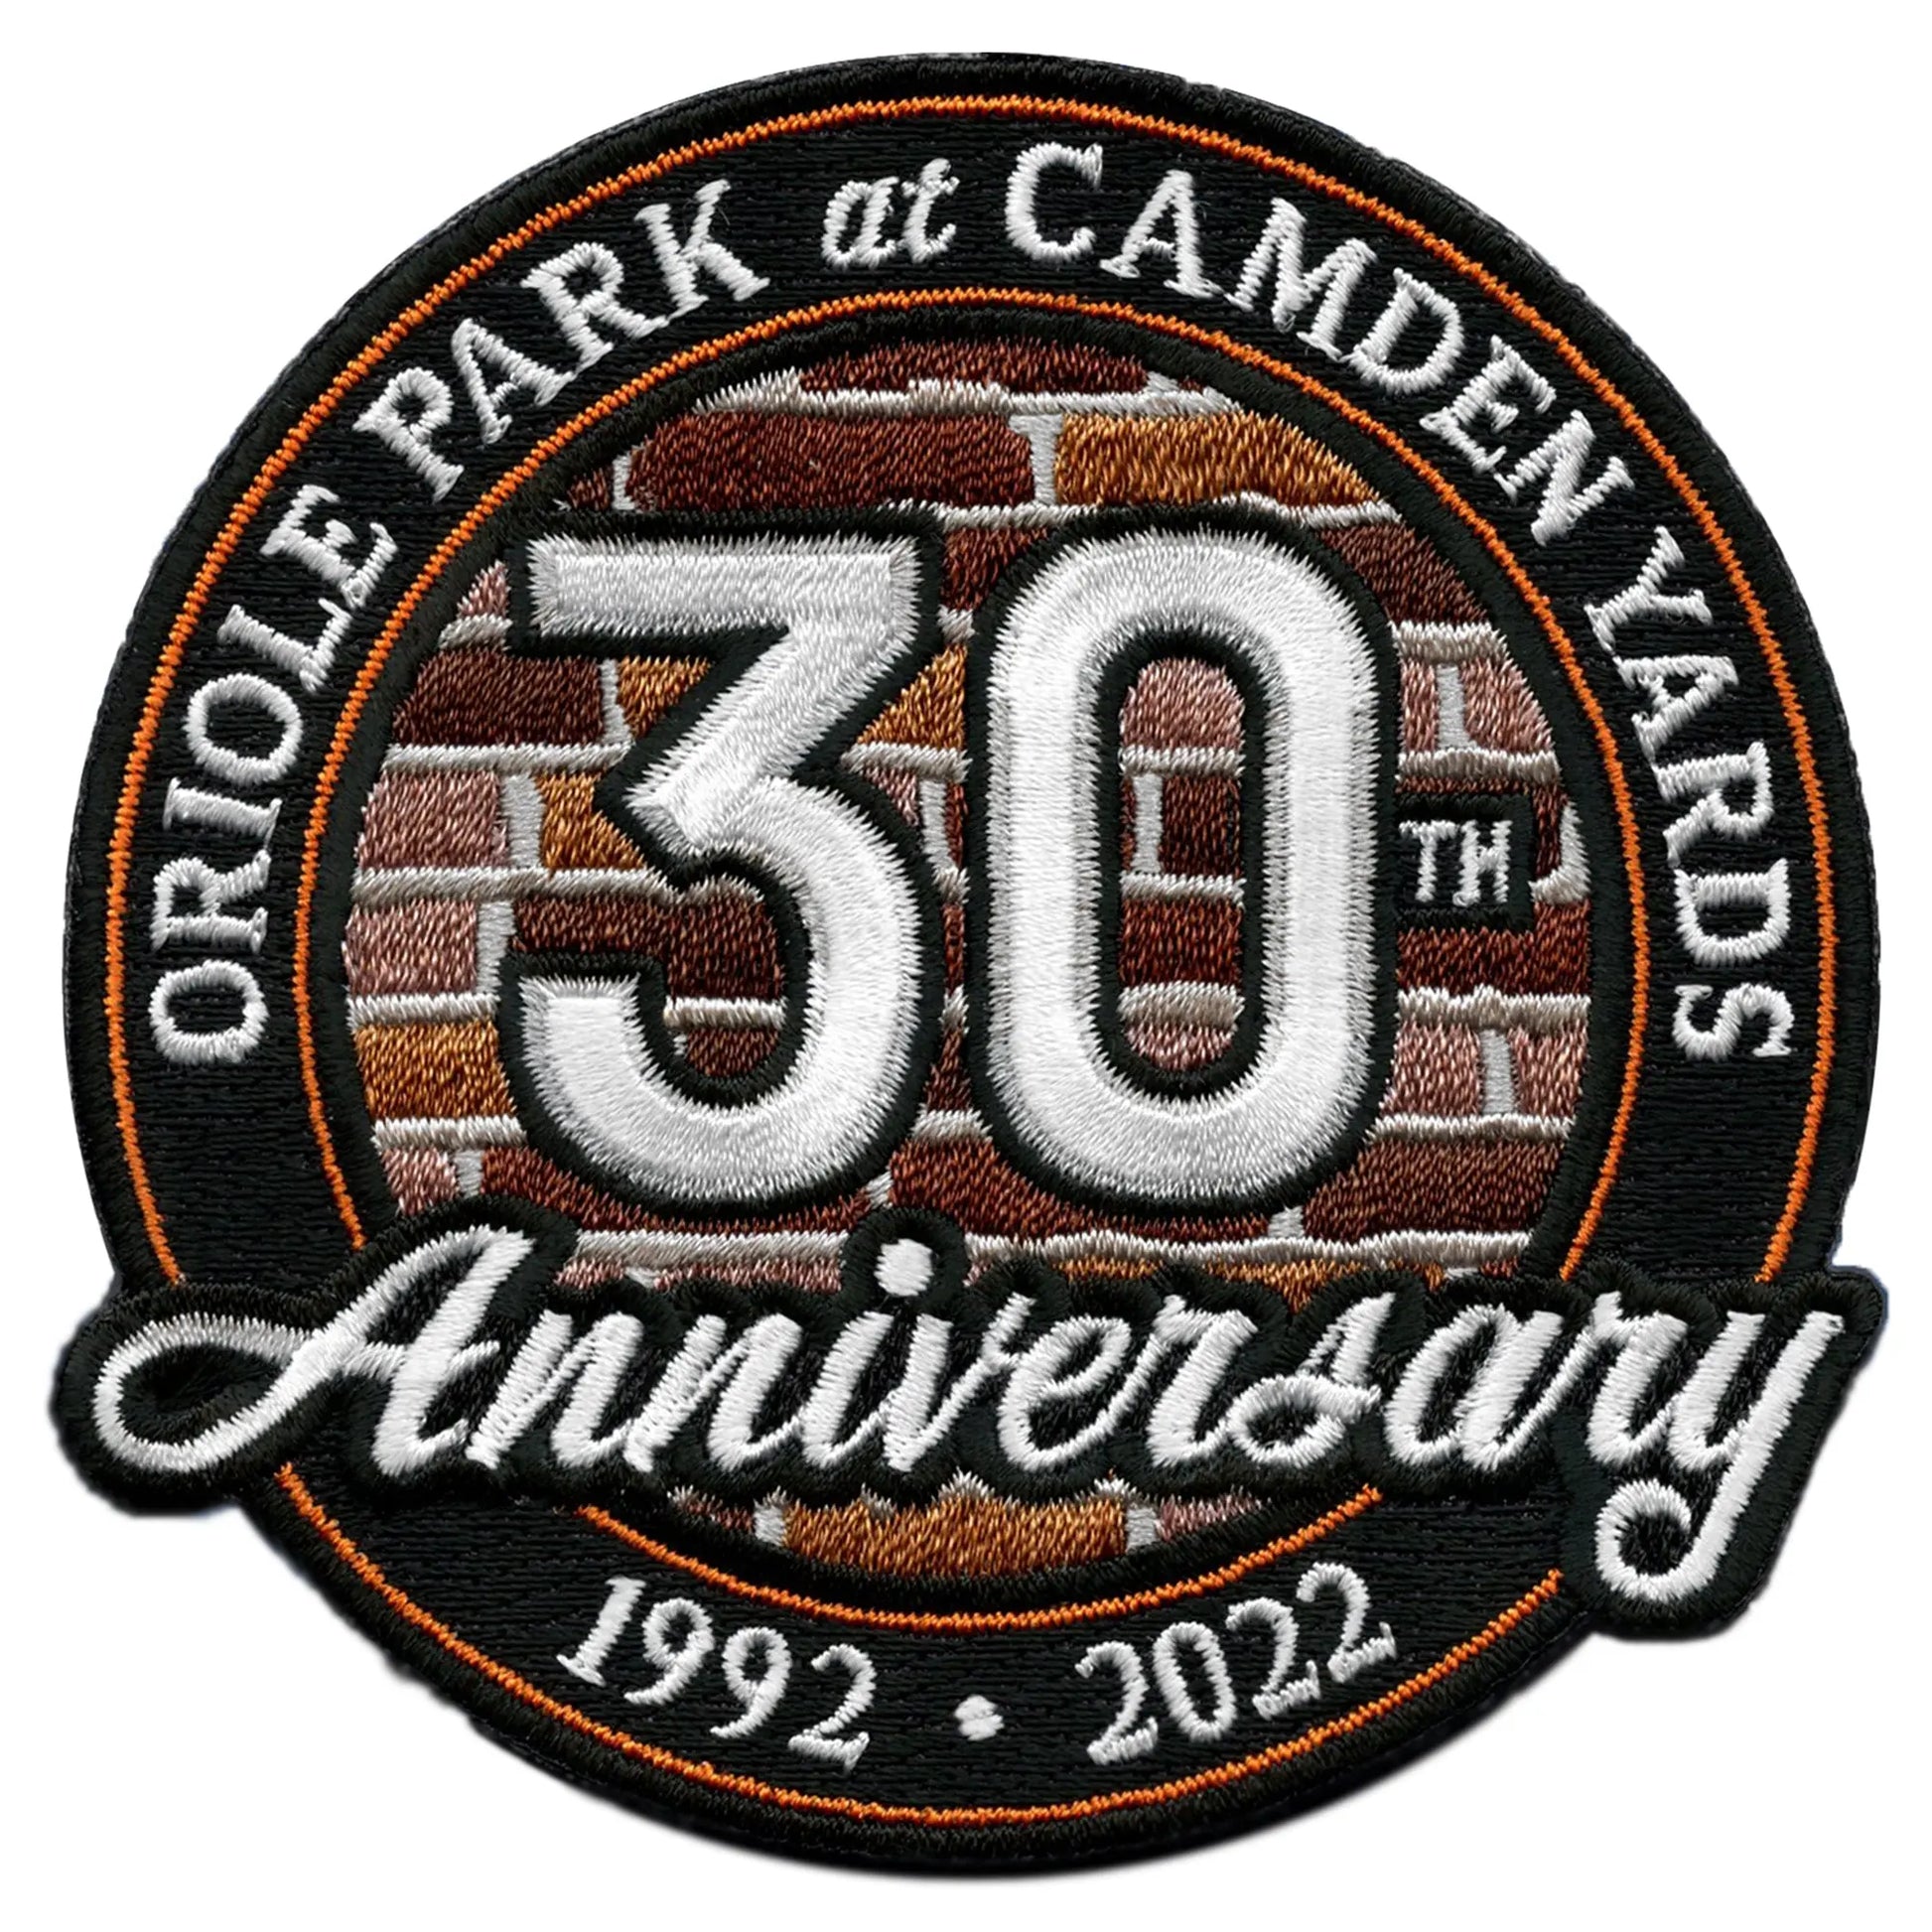 Baltimore Orioles Anniversary and Commemorative Patch